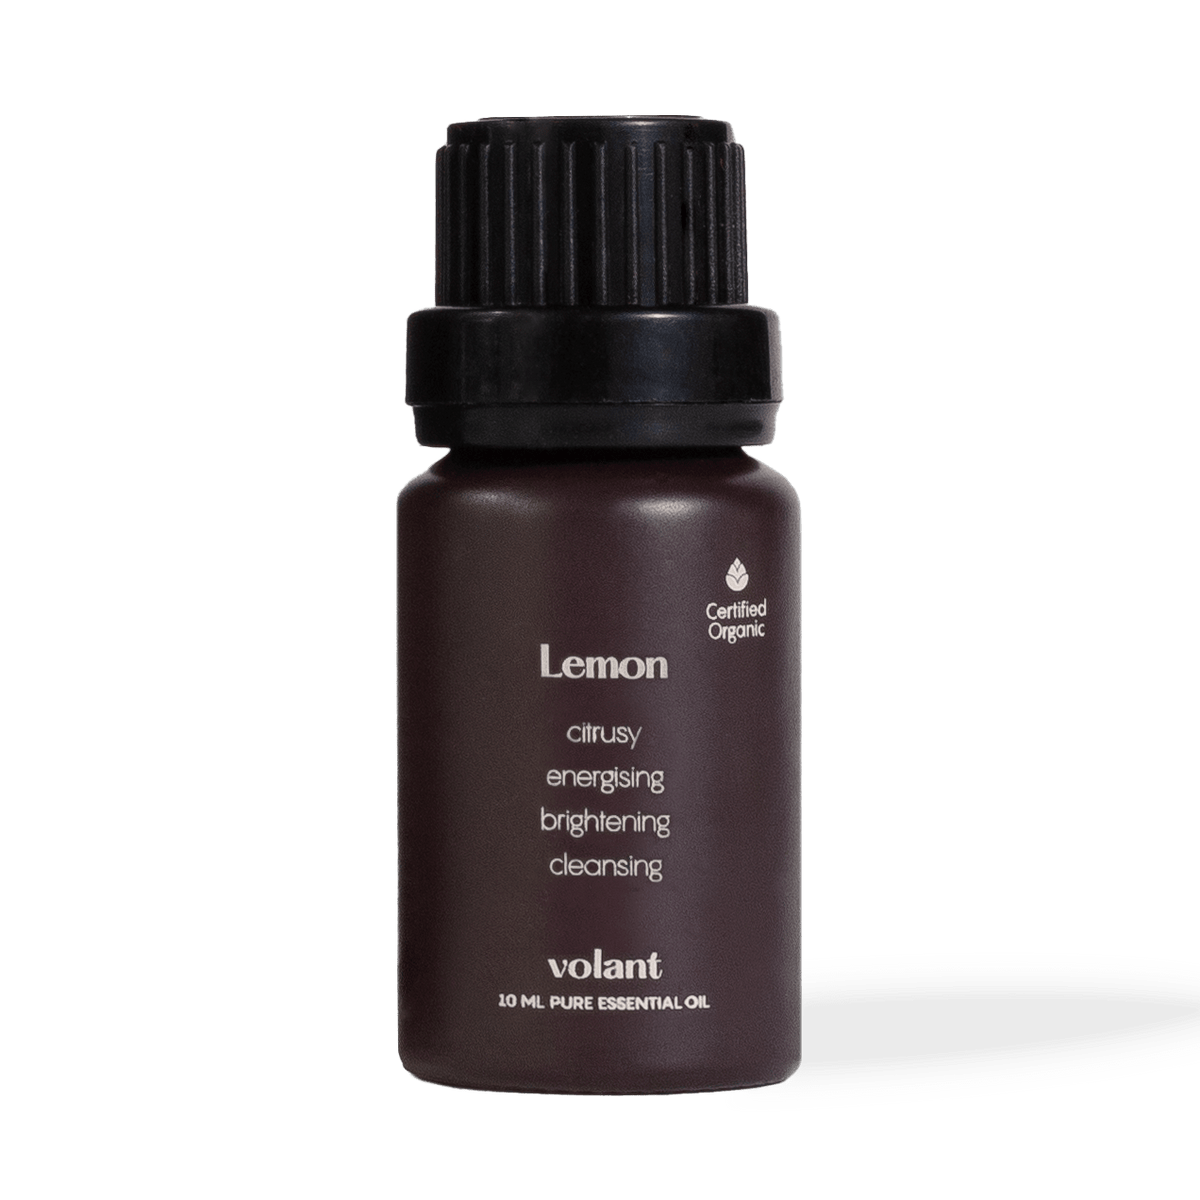 volant organic lemon essential oil that fights exhaustion, helps with depression, clears your skin, kills harmful viruses and bacteria